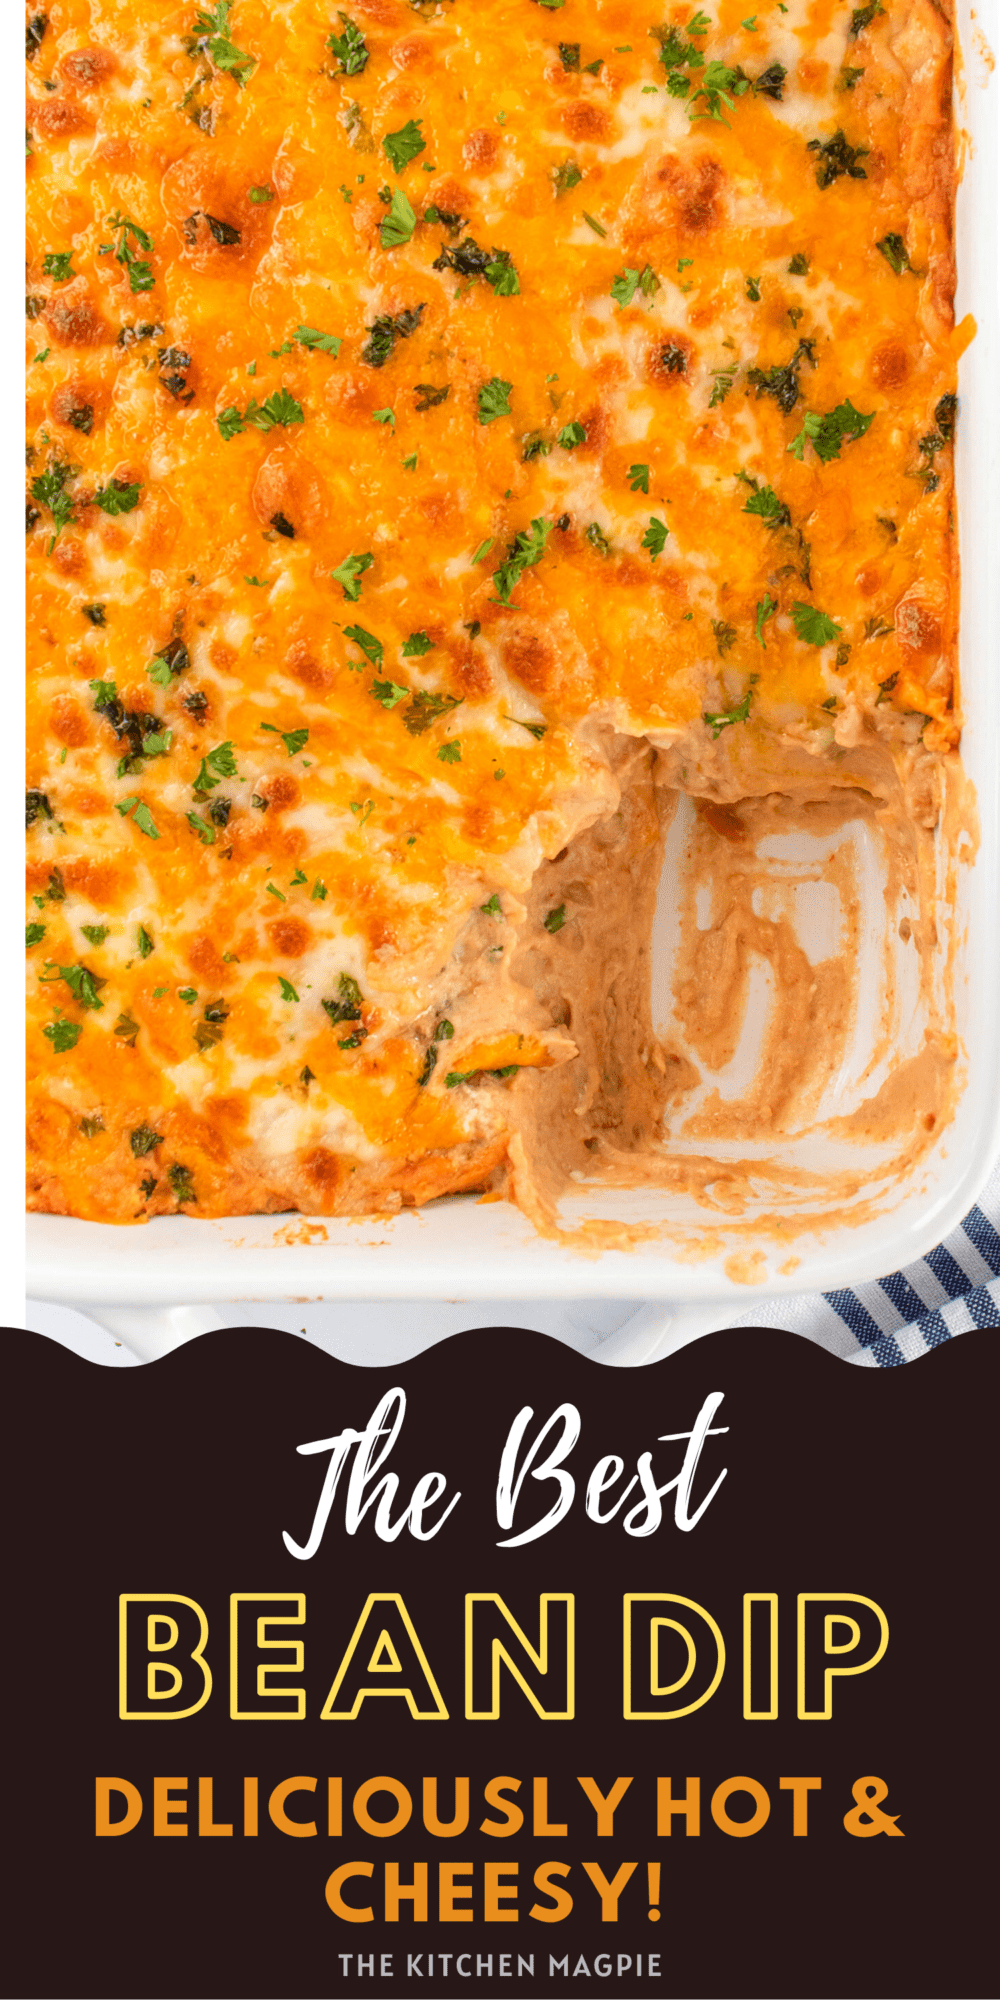 Hot, cheesy, and utterly delicious bean dip is the perfect party appetizer that is fast and easy to make! Always a crowd-pleaser that can be customized to your own liking.